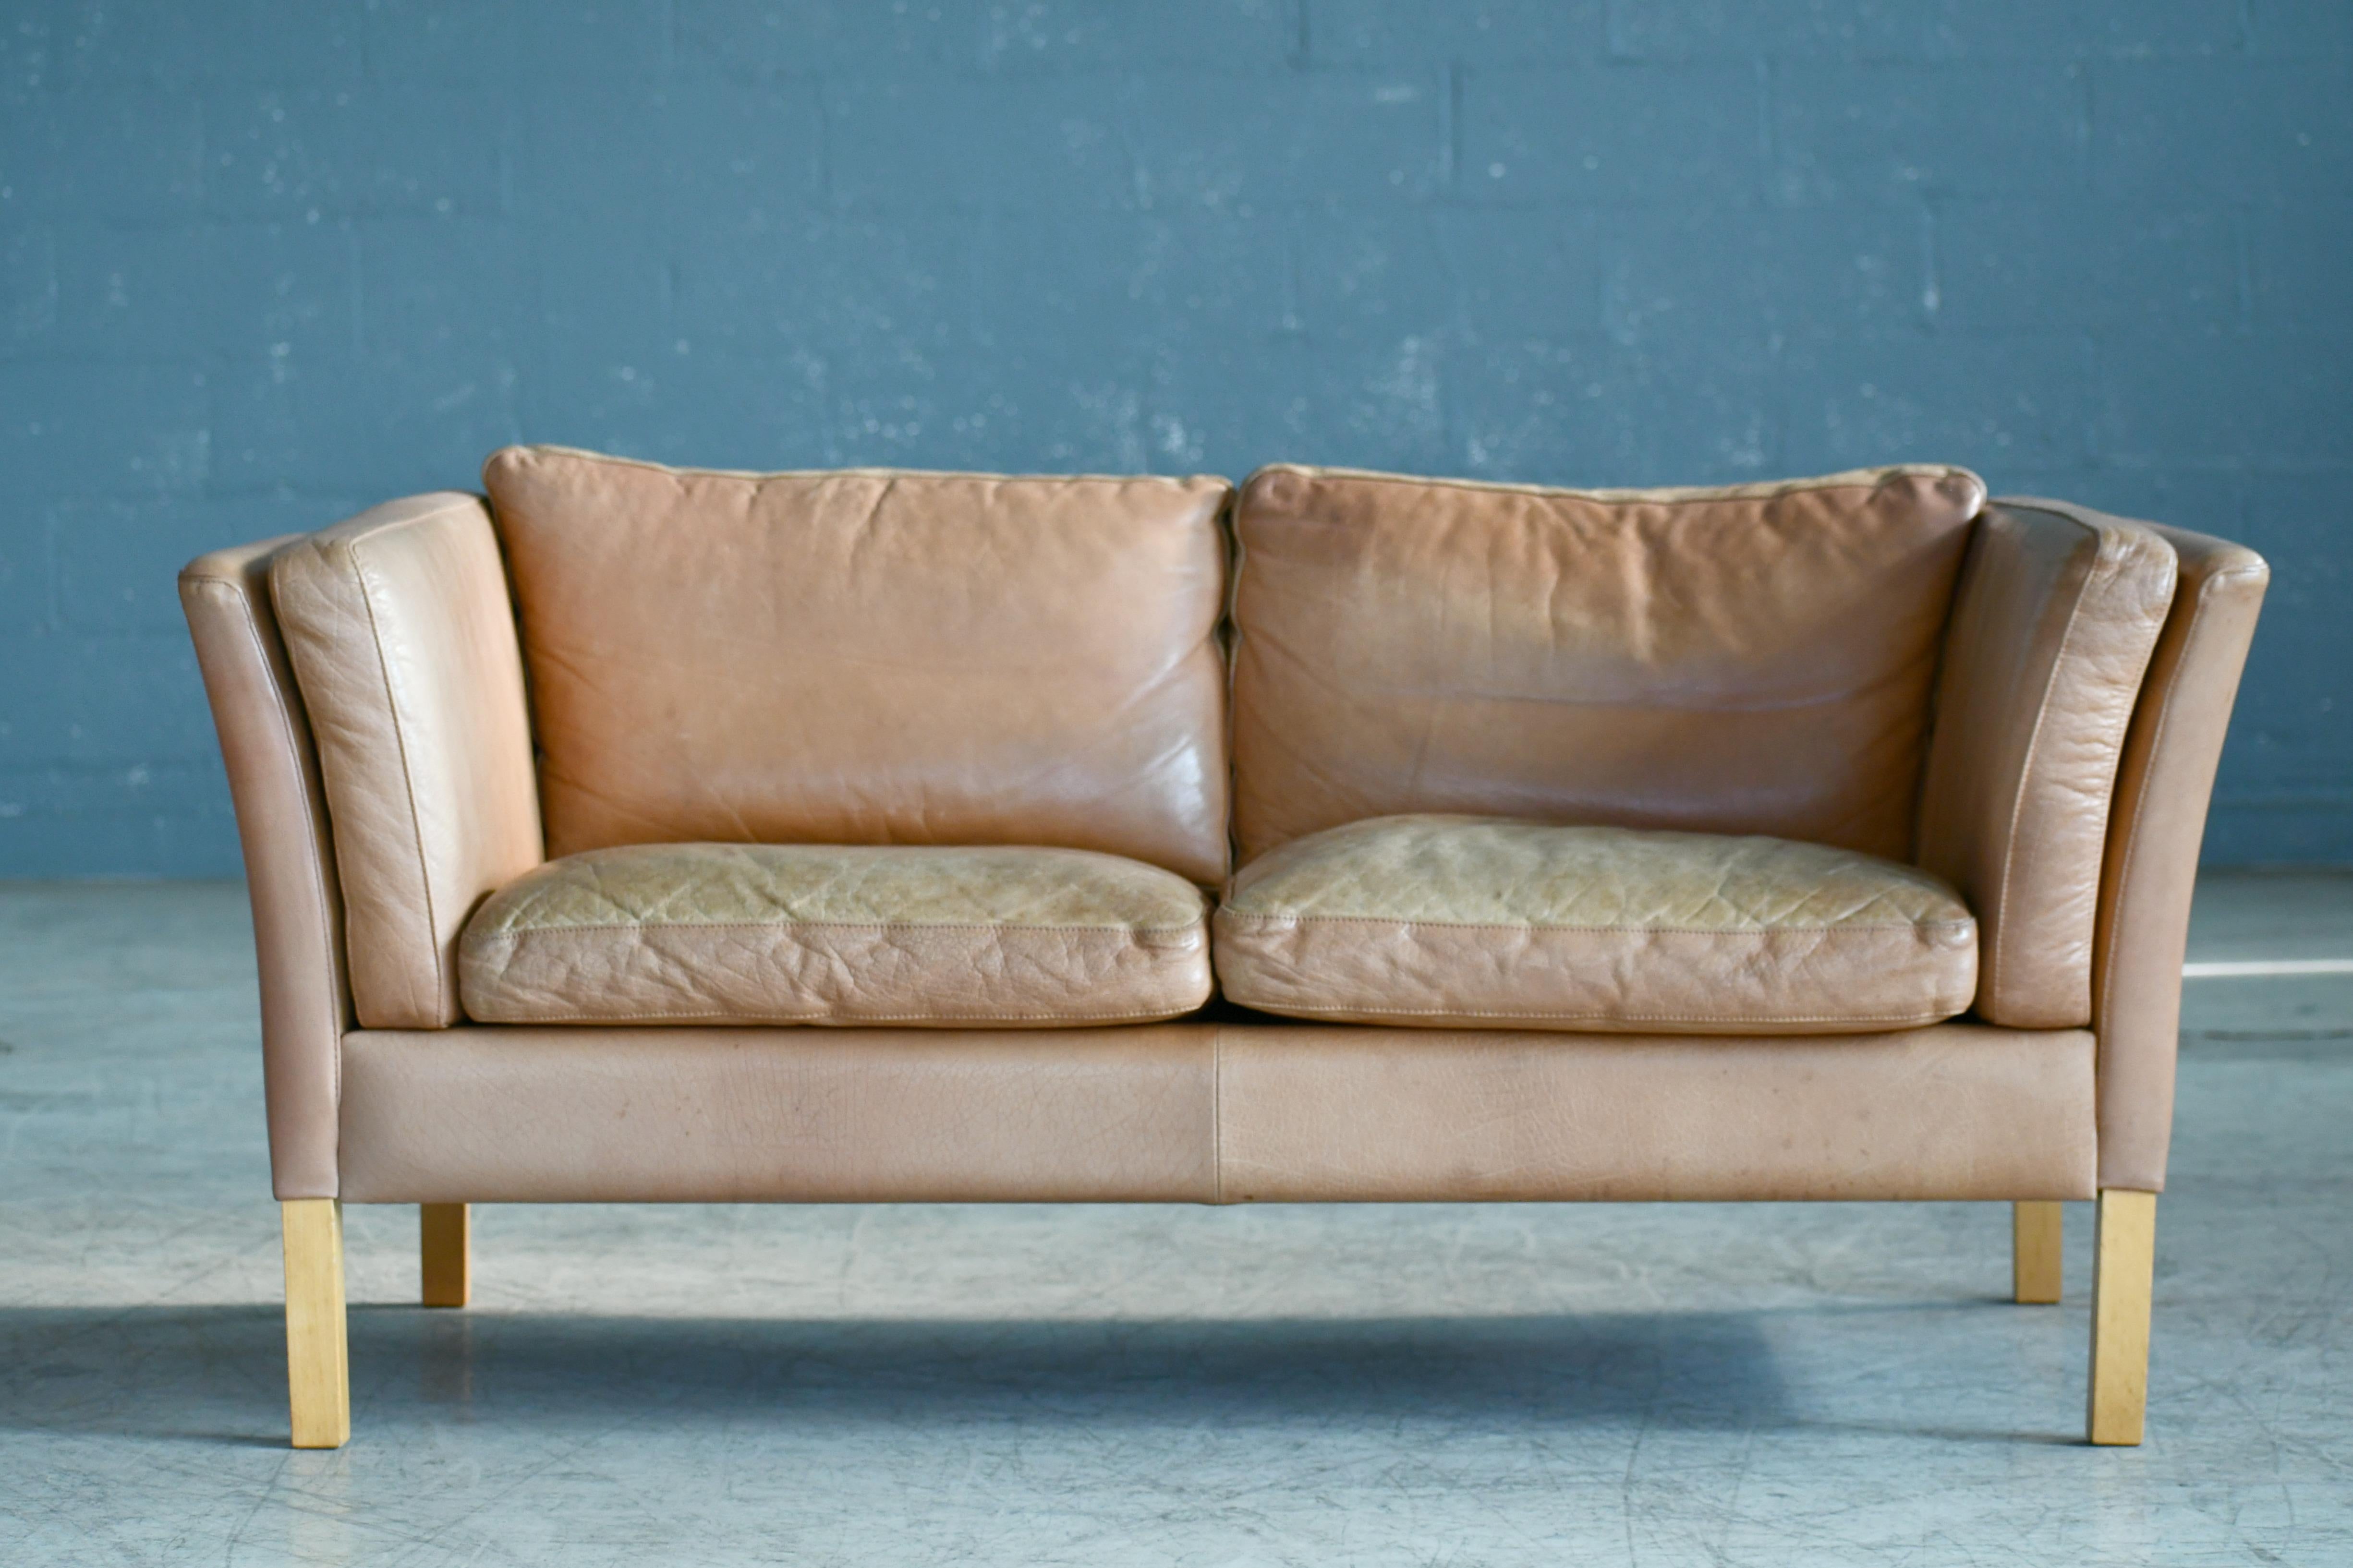 Great loveseat or two-seat sofa made by Stouby Mobler, Denmark. High quality construction in the traditional style of Børge Mogensen covered in a nice butterscotch colored leather that has faded into various shades of cream and tan colors over the